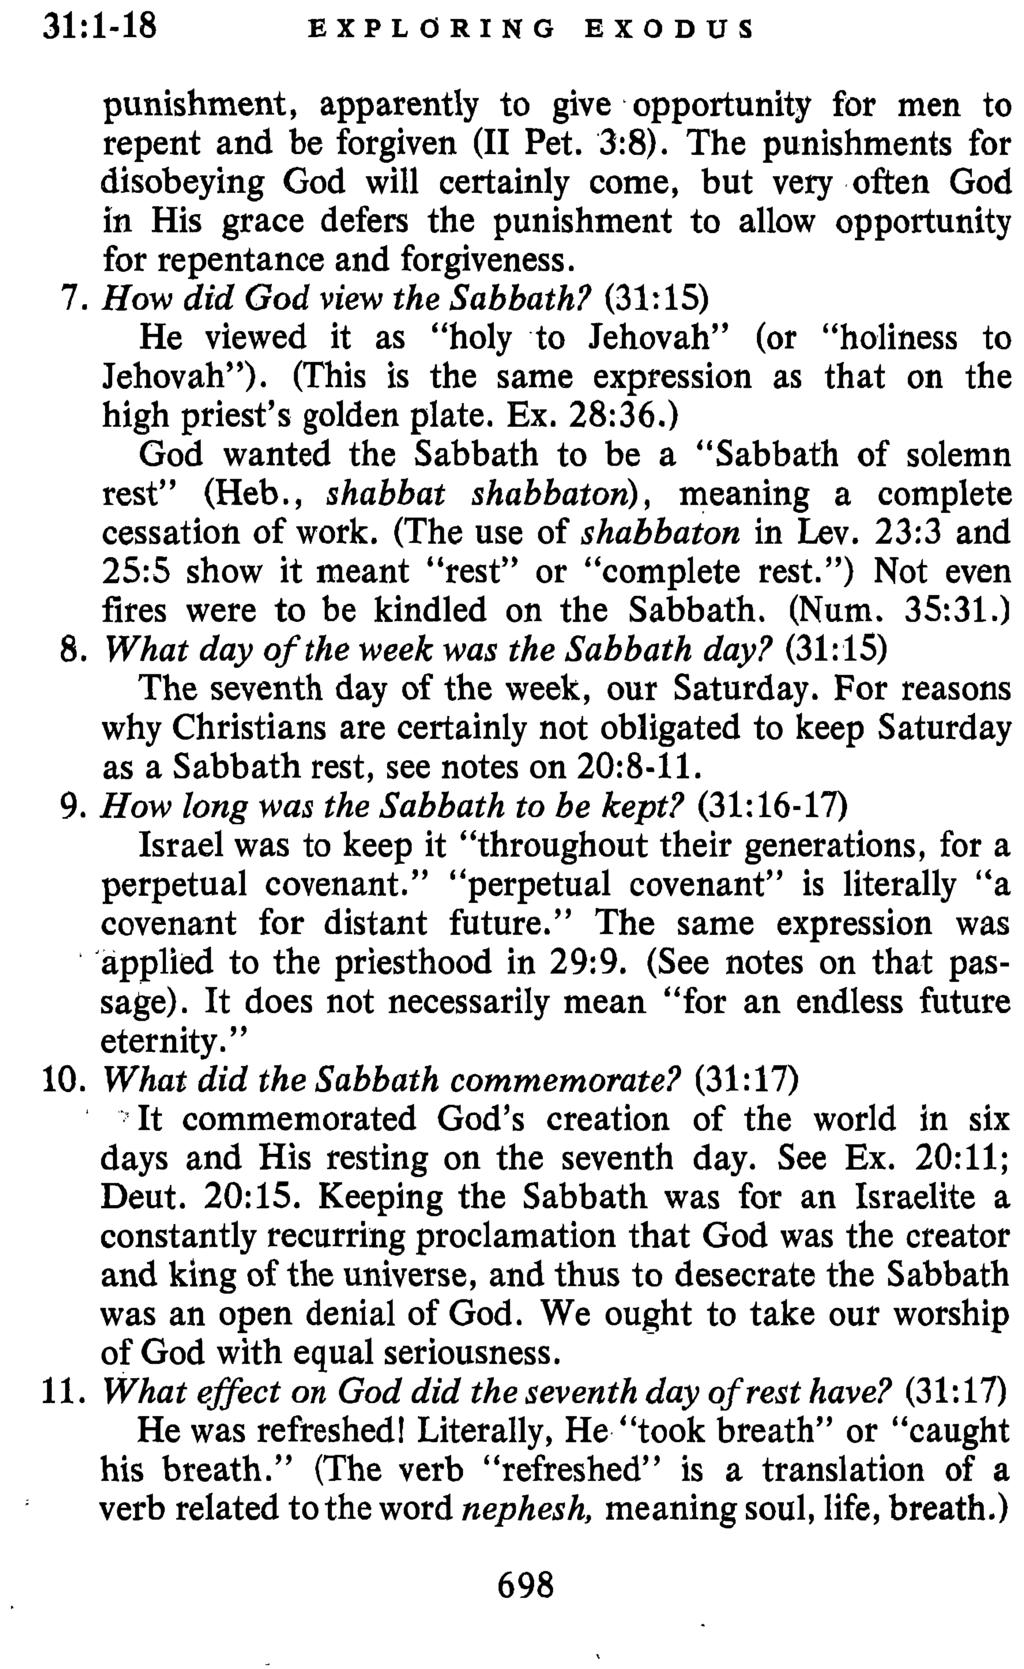 31~1-18 EXPLORING EXODUS punishment, apparently to give opportunity for men to repent and be forgiven (I1 Pet. 38).